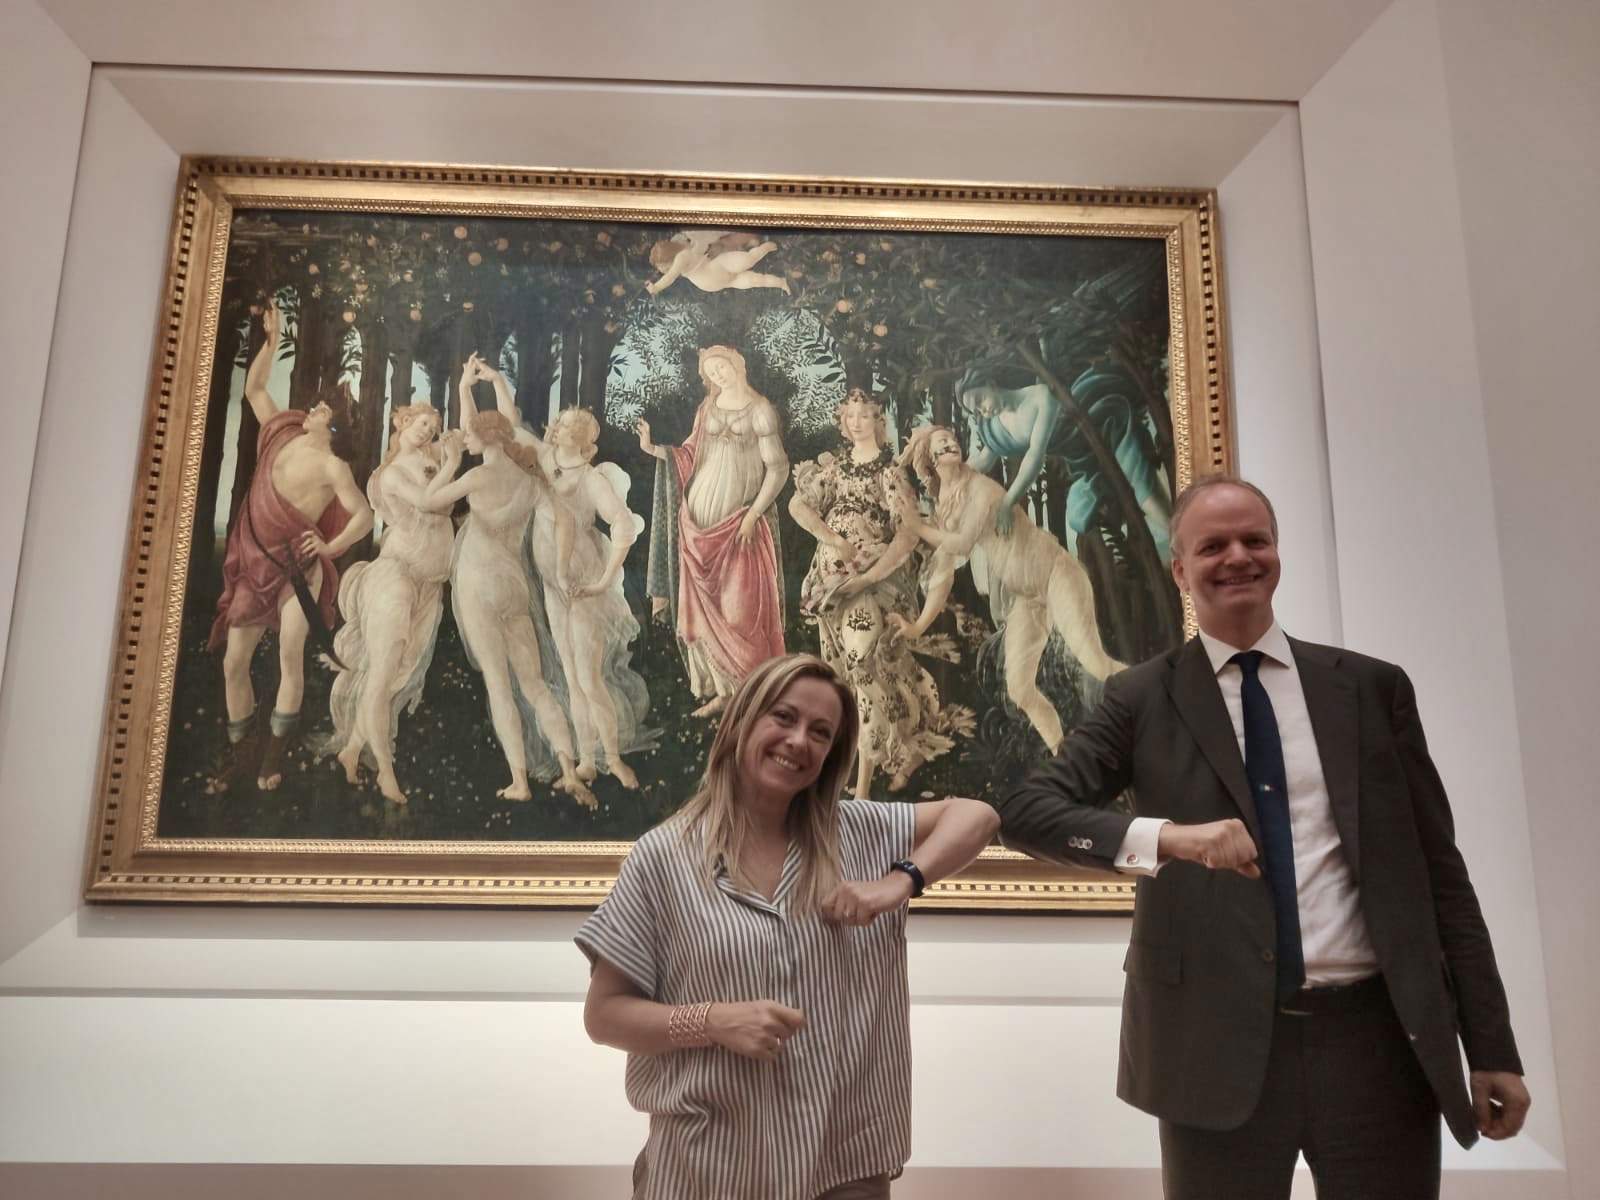 Giorgia Meloni at the Uffizi: what if visiting museums became a habit for politicians?